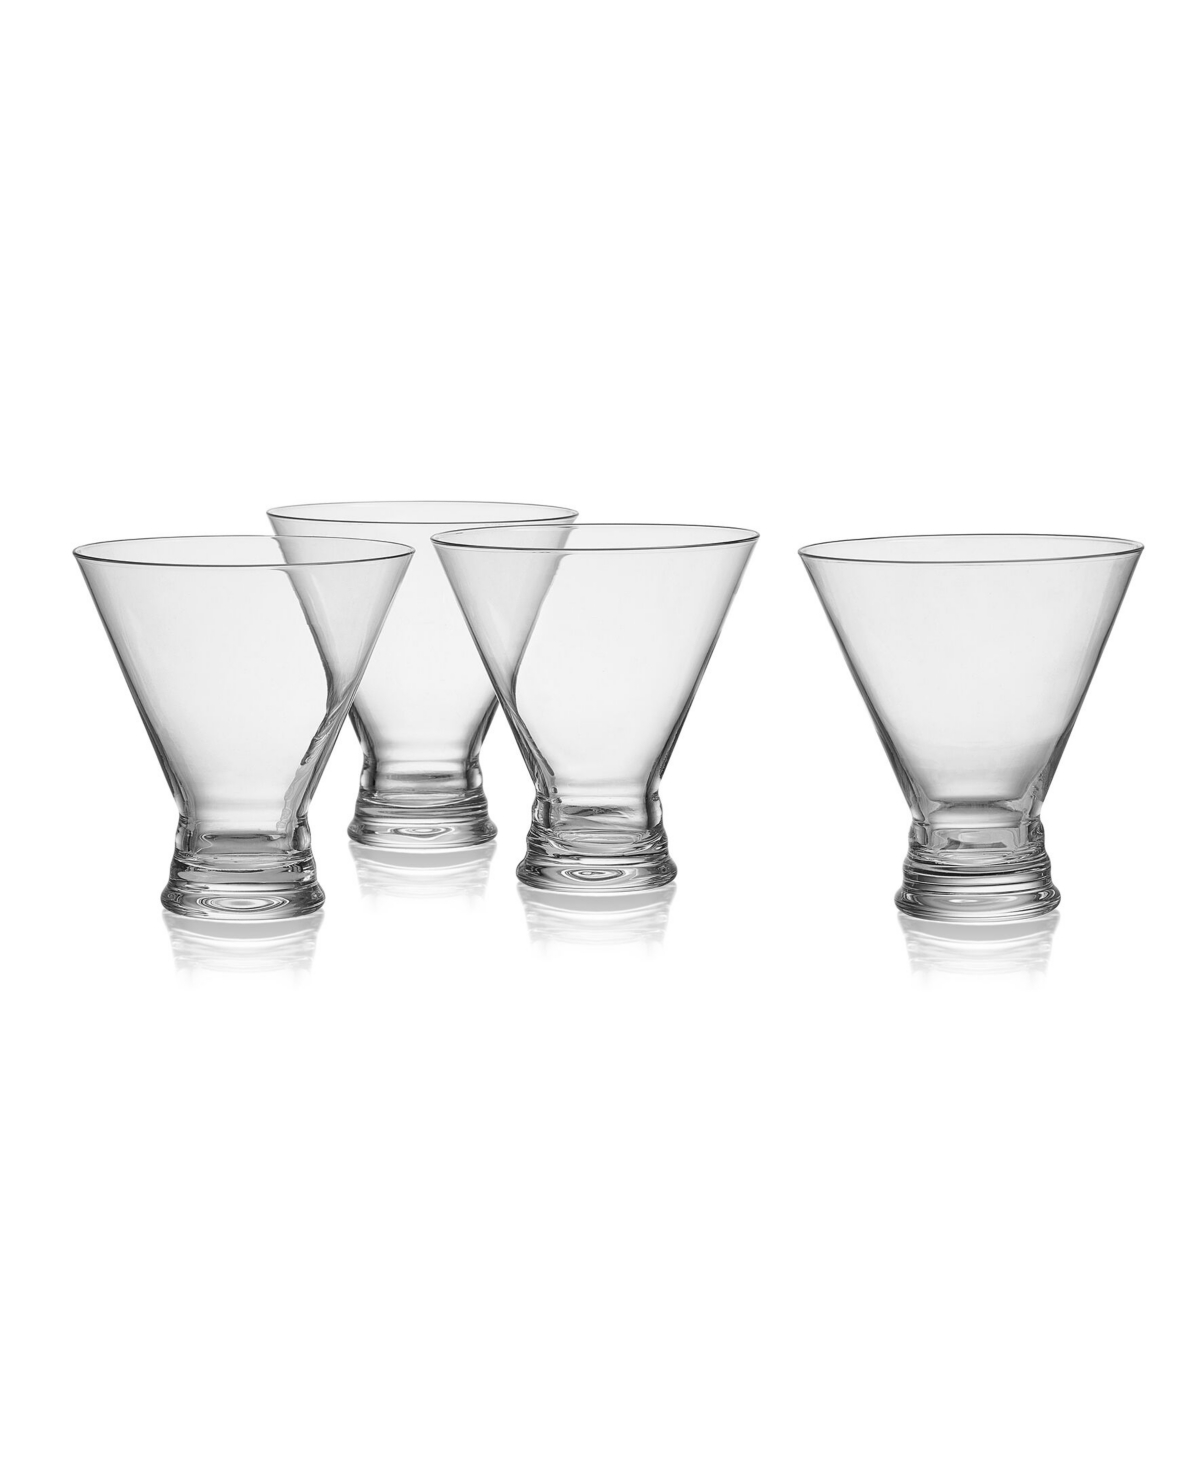 Mikasa Craft 12 Ounce Martini Cosmo Glass 4-piece Set In Clear